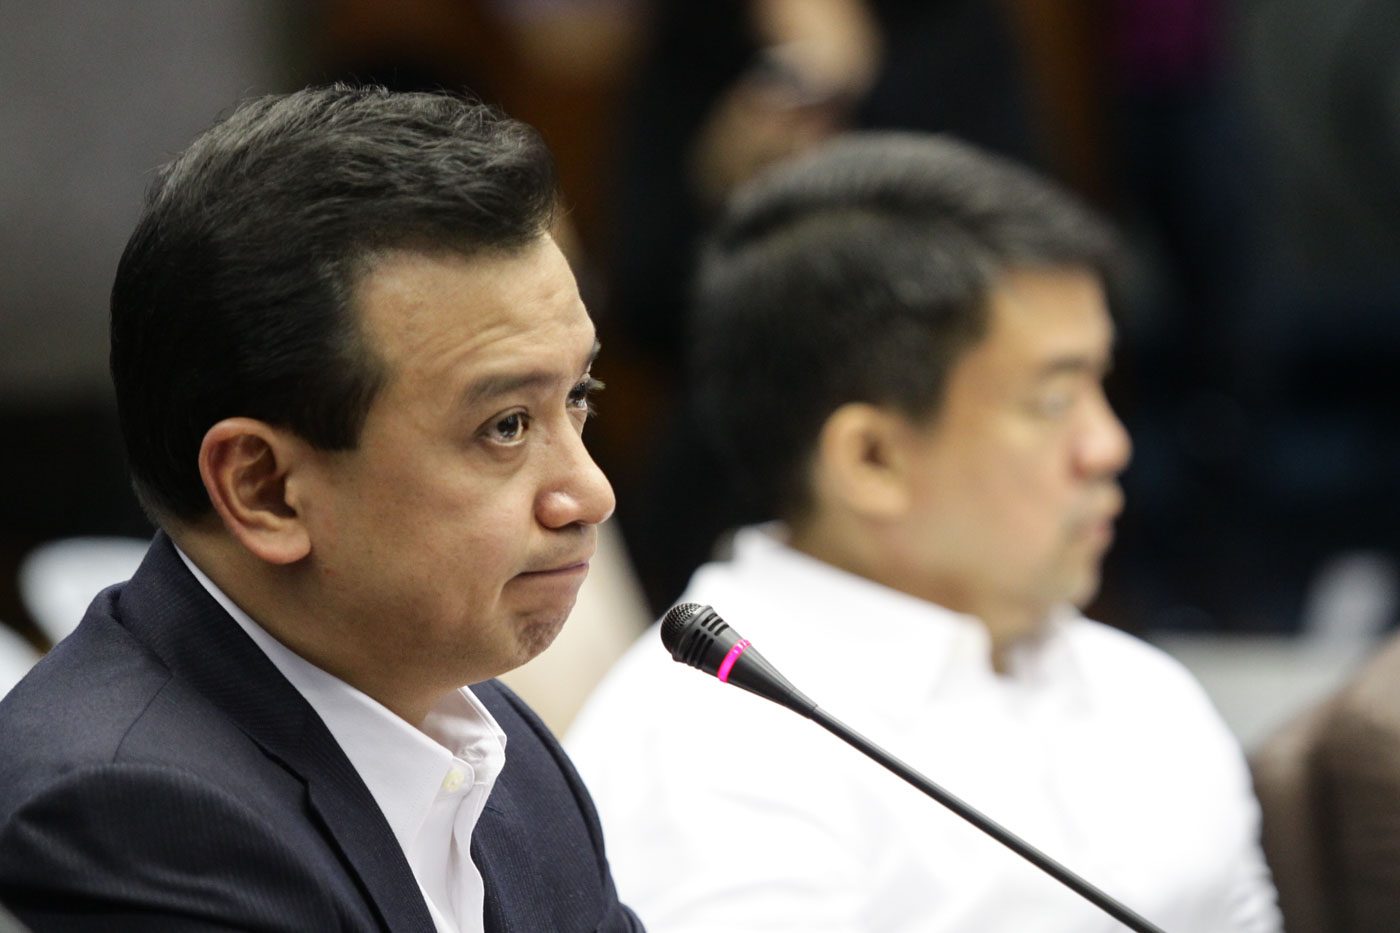 CA summons Trillanes over bribery allegations vs 2 justices